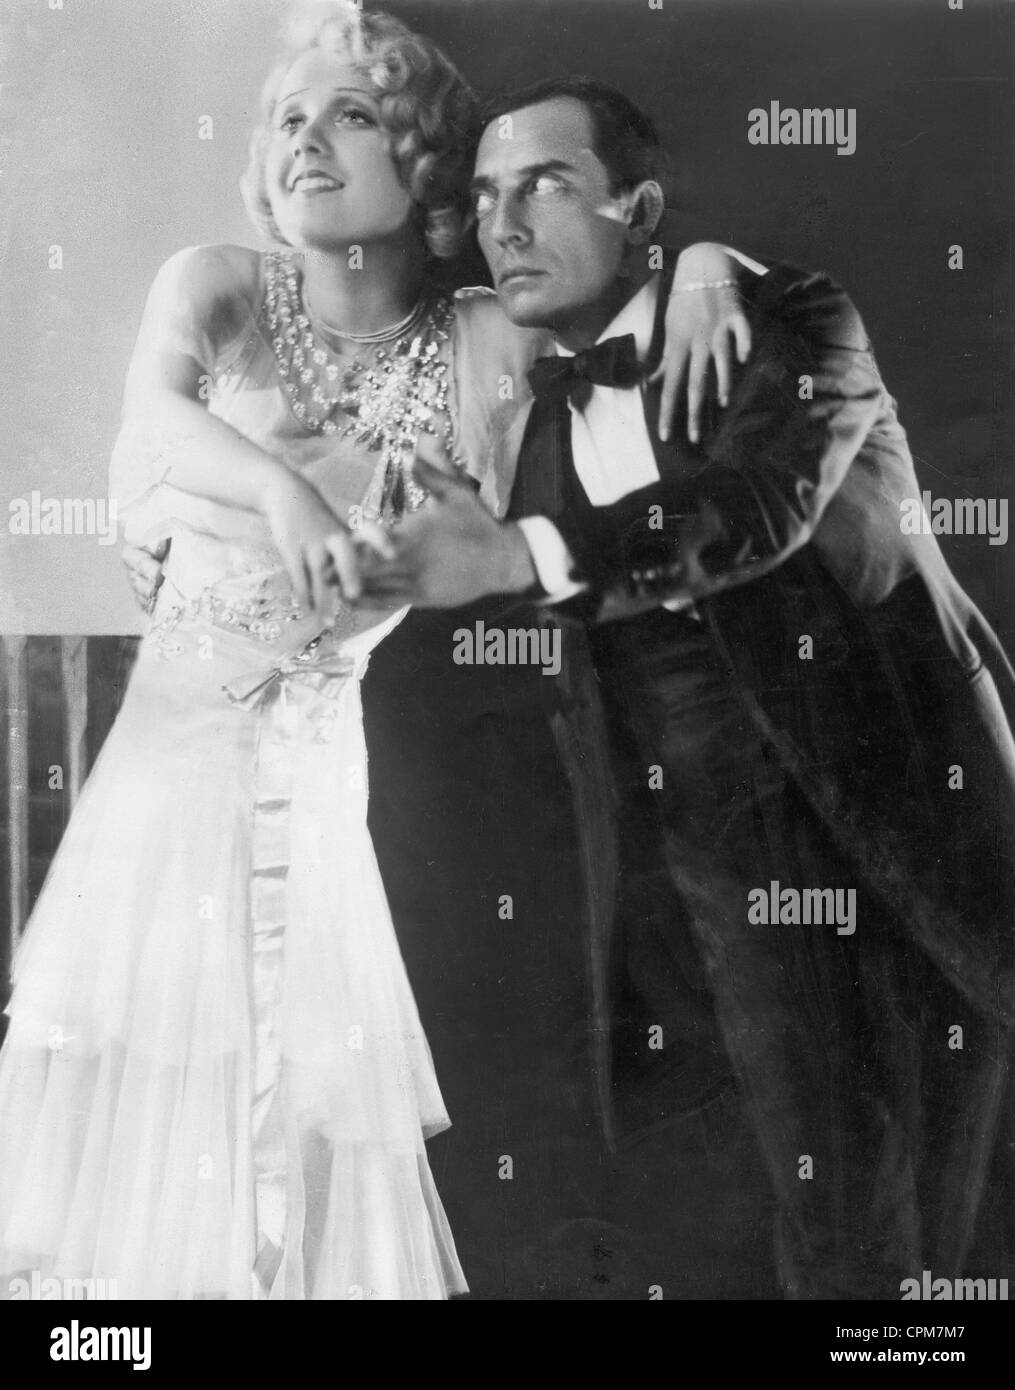 Buster Keaton and Anita Page in 'Buster rutscht ins Filmland' in 1930 Stock Photo